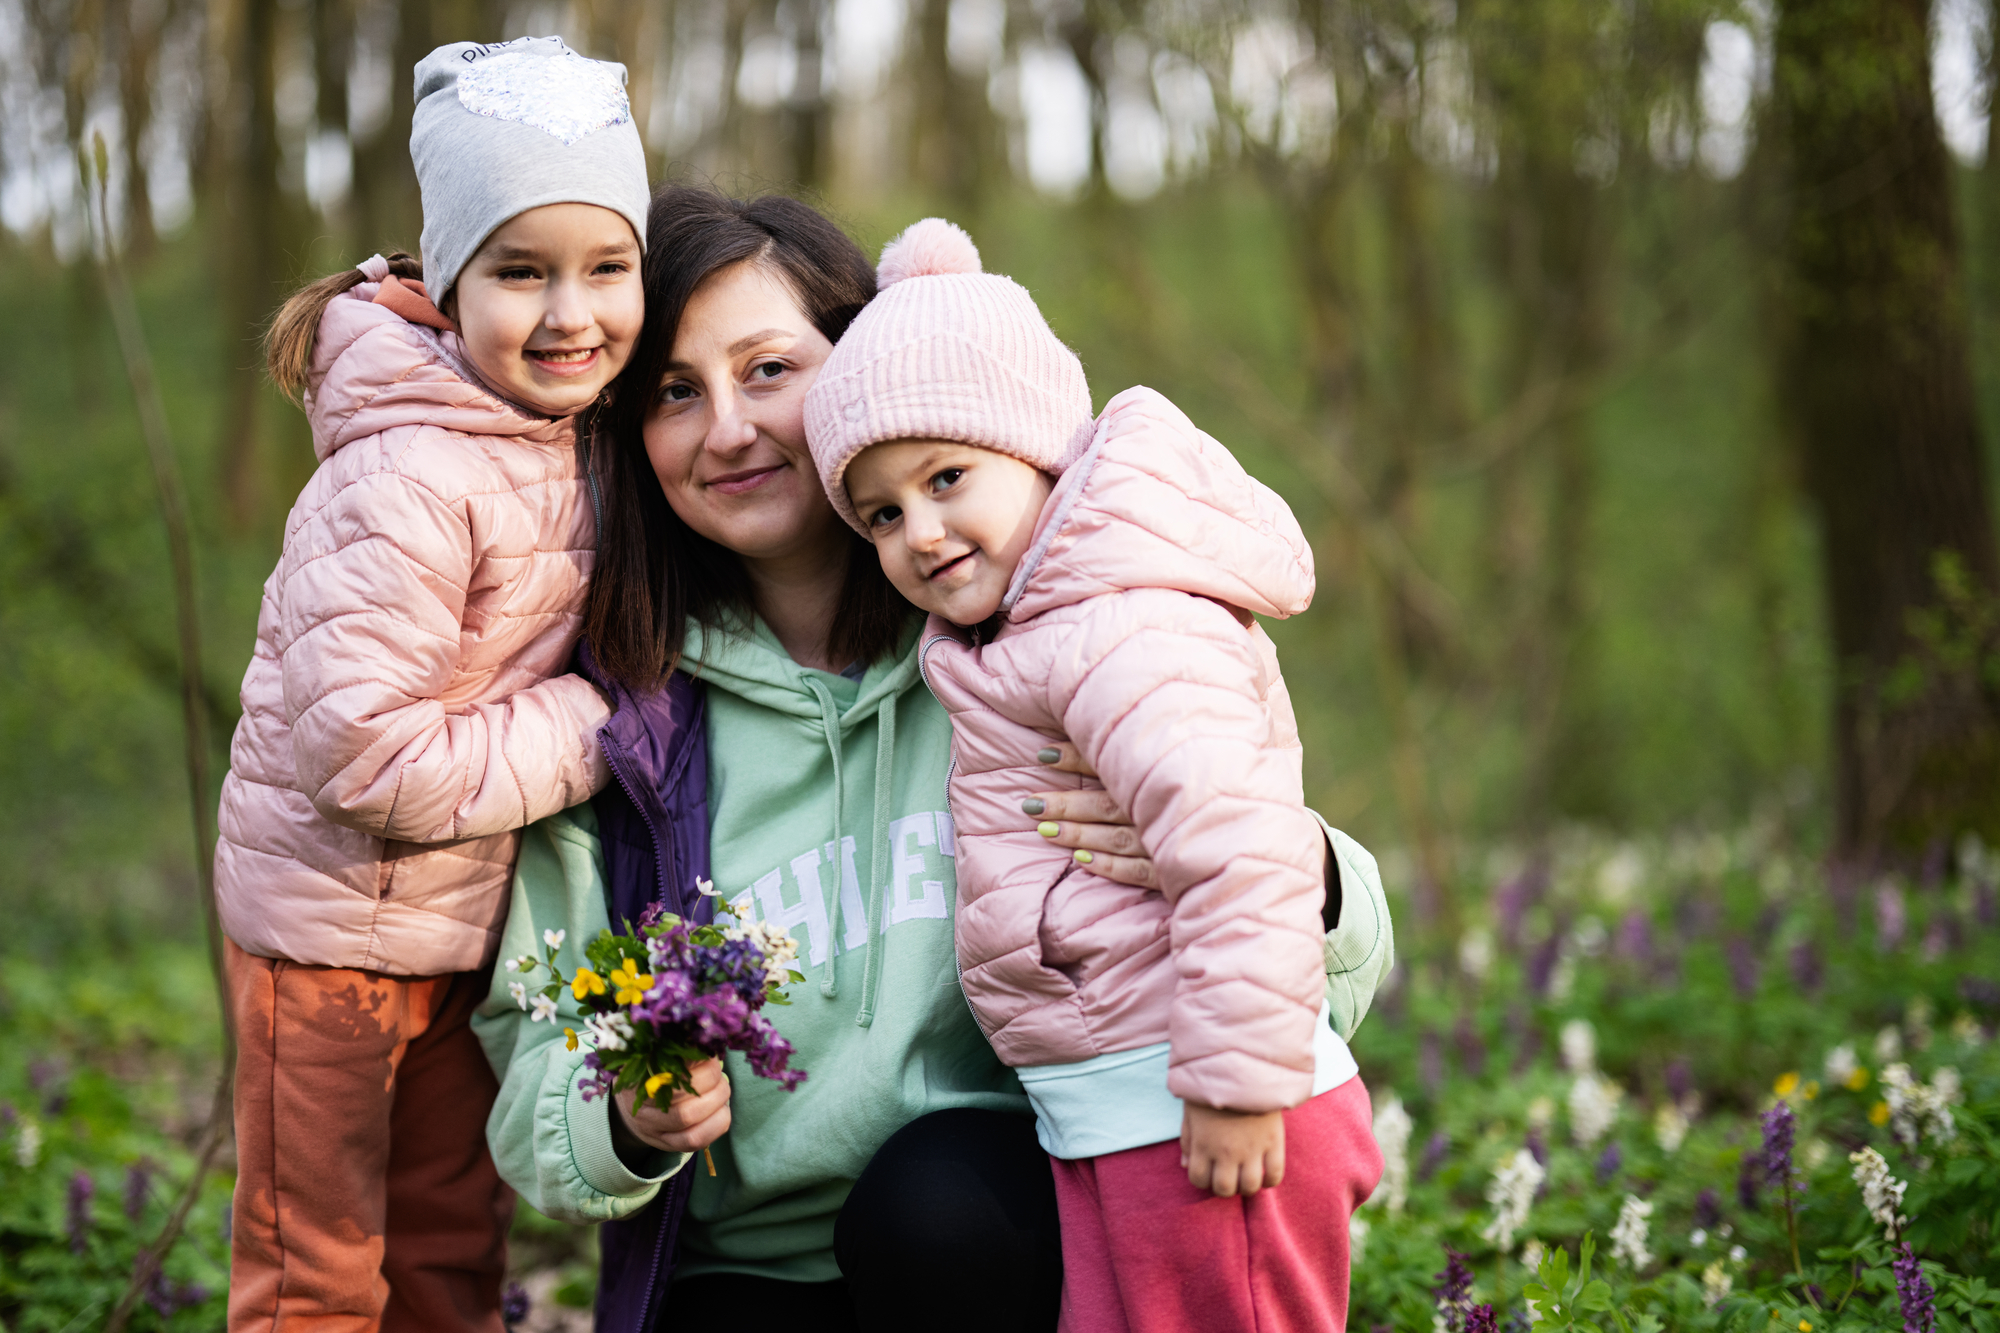 Happy Mother's Day. We love you, mom. Mother with a bouquet of flowers and two daughters in spring blooming forest.